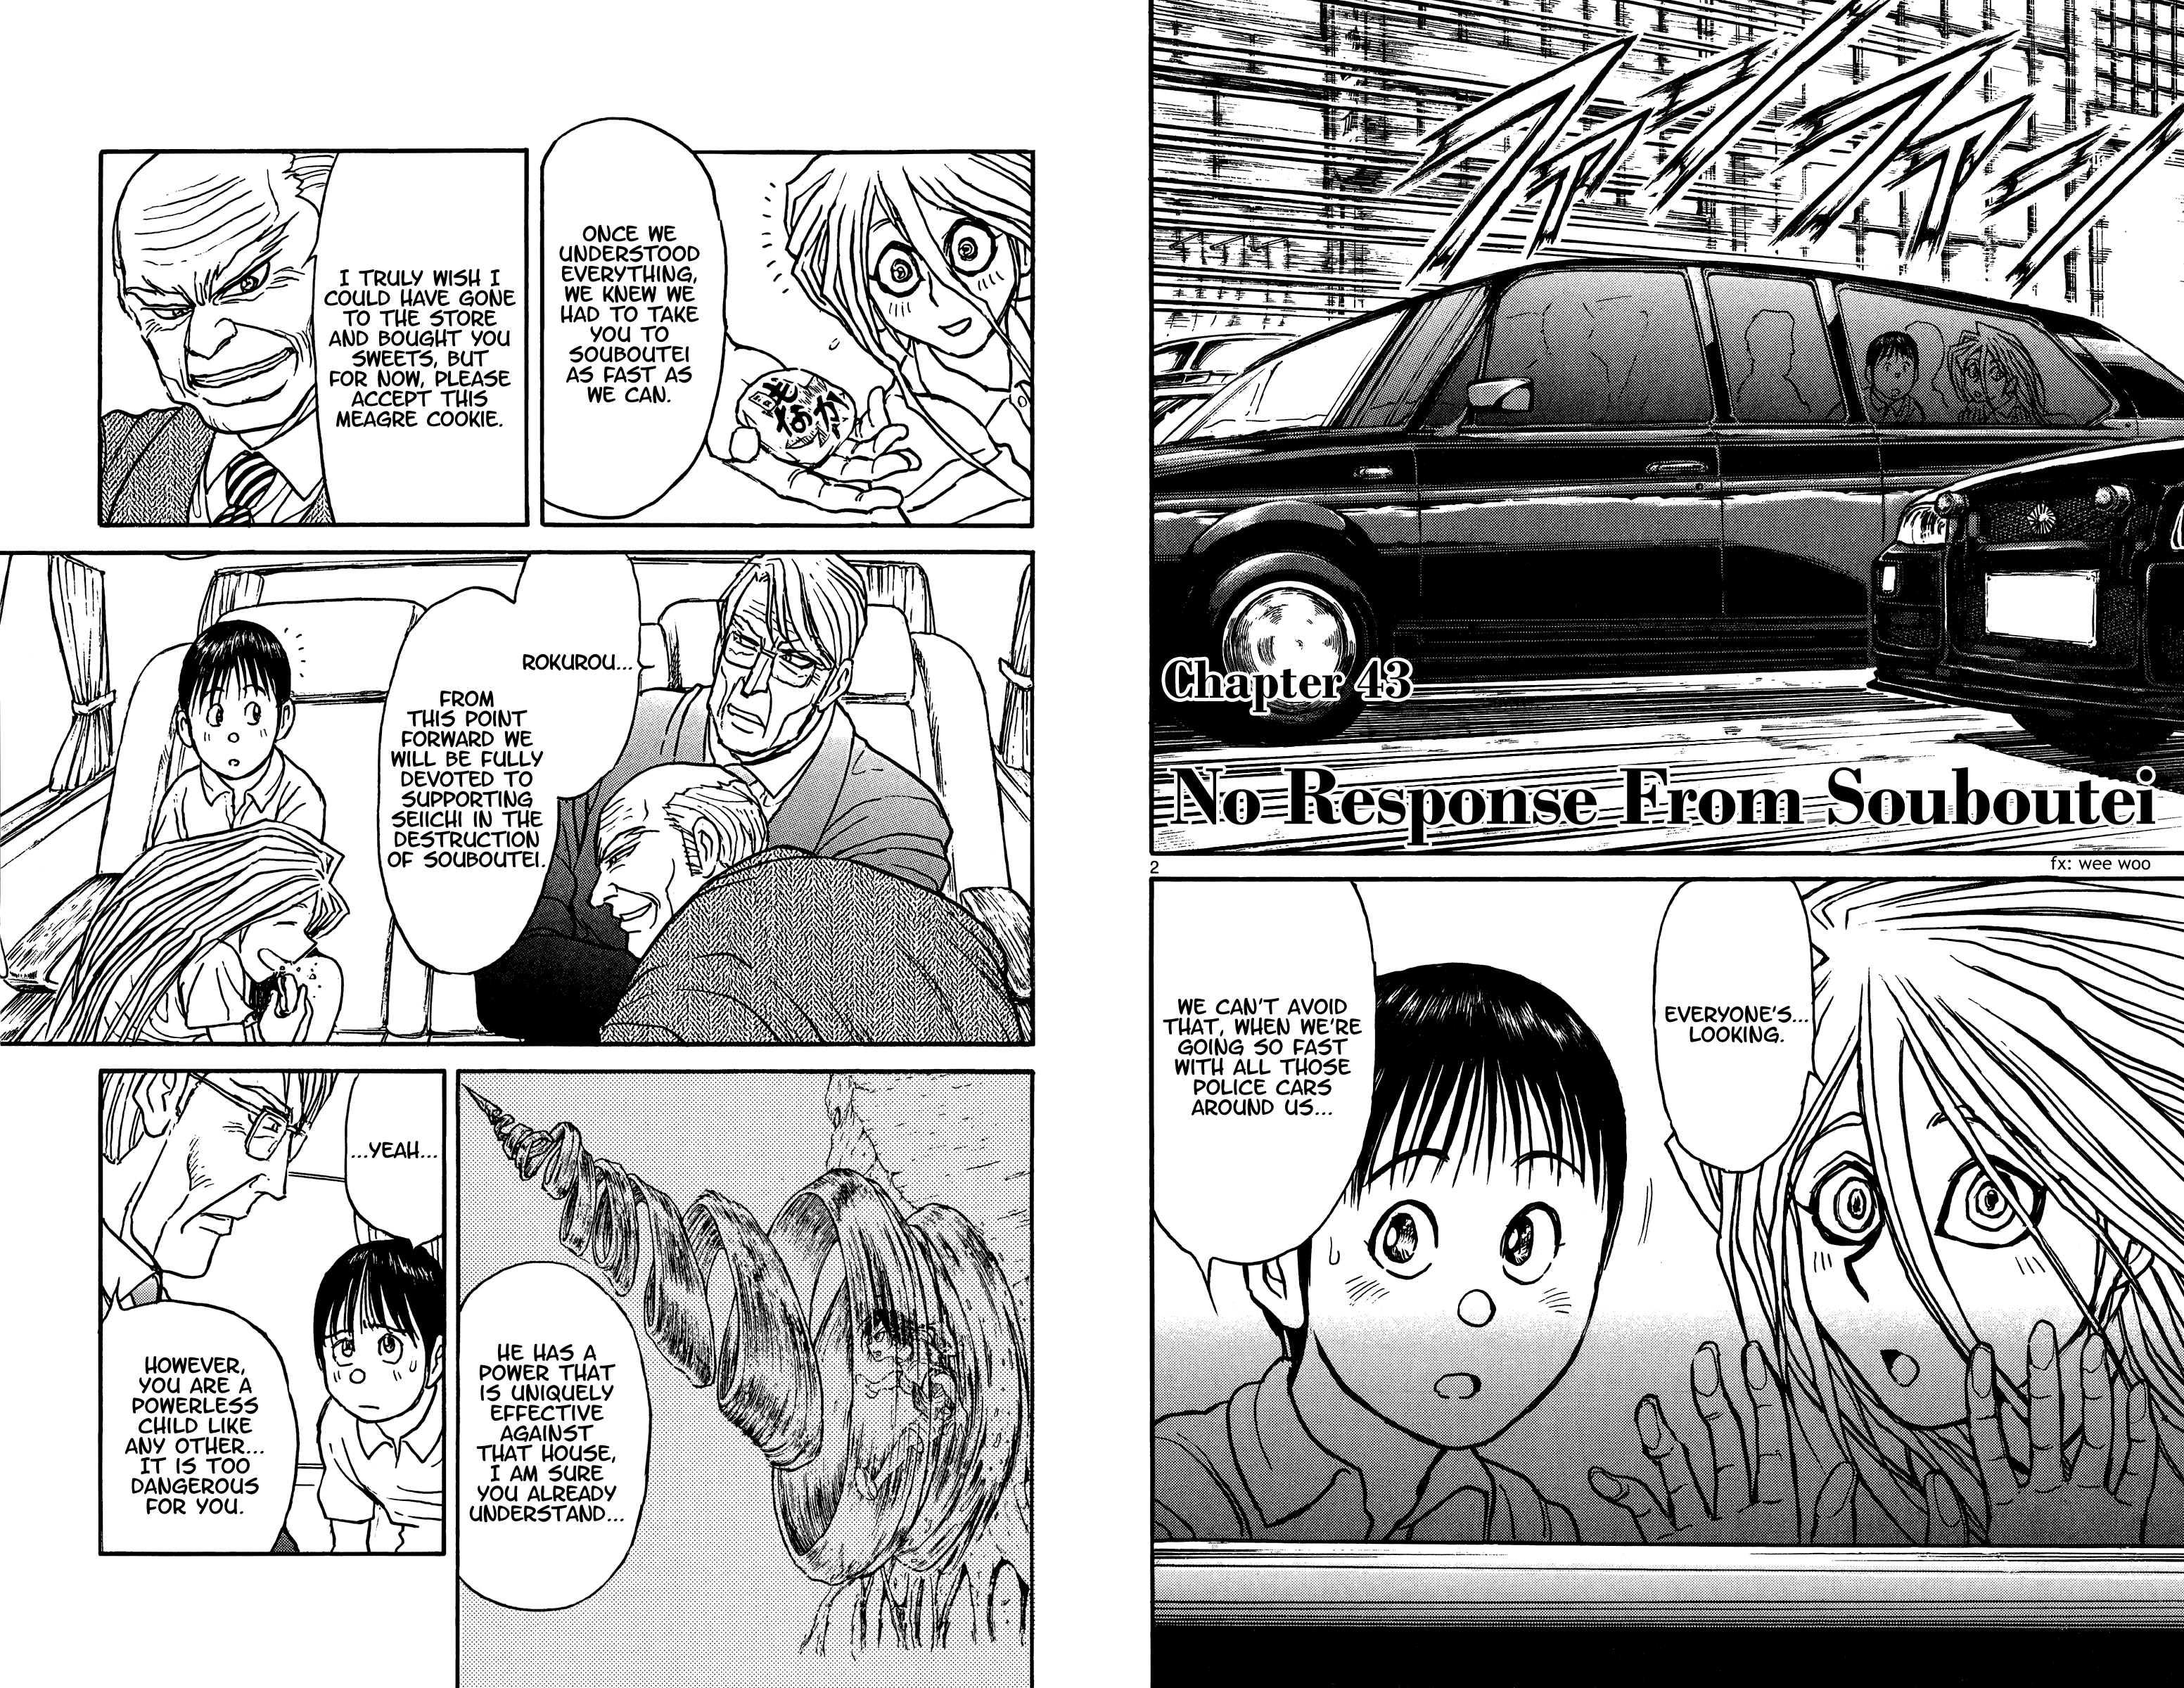 Souboutei Must Be Destroyed Vol.5 Chapter 43: No Response From Souboutei - Picture 2